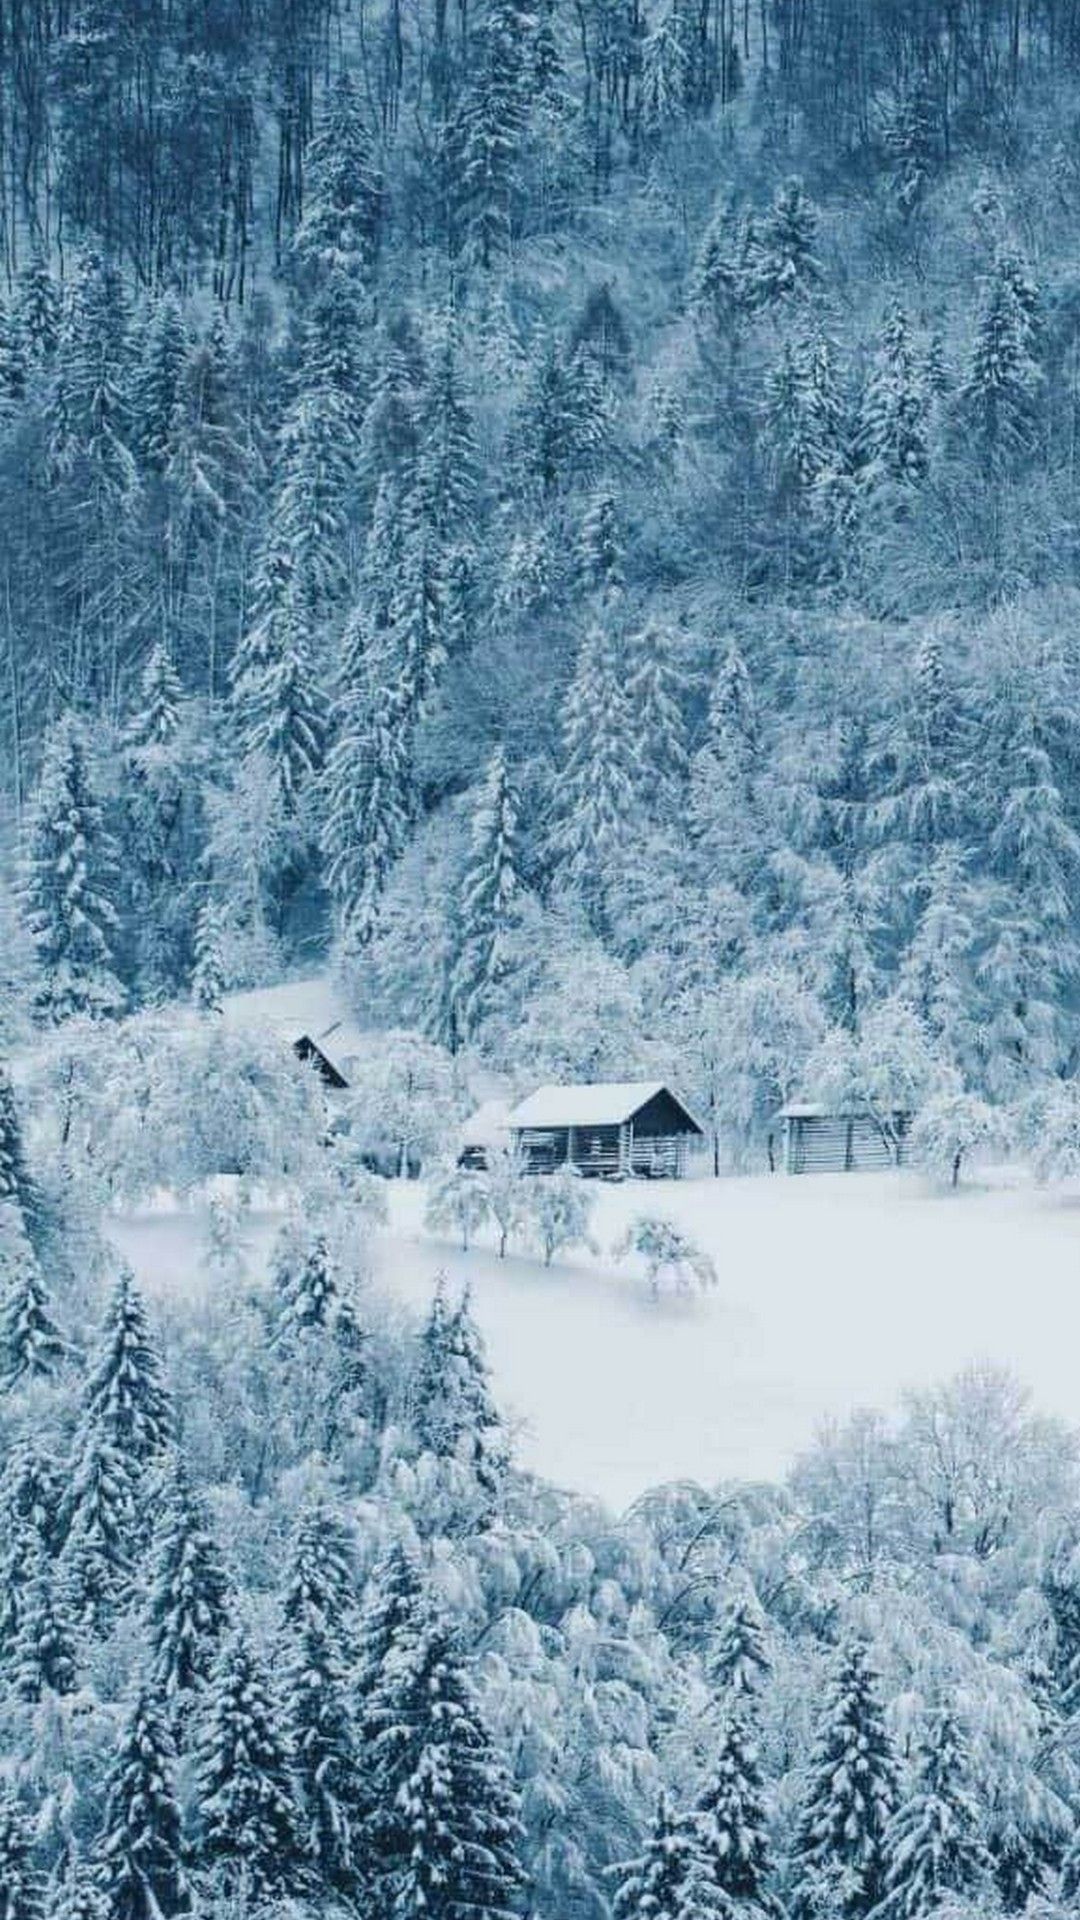 A snow covered forest with a small house in the middle - Winter, snow